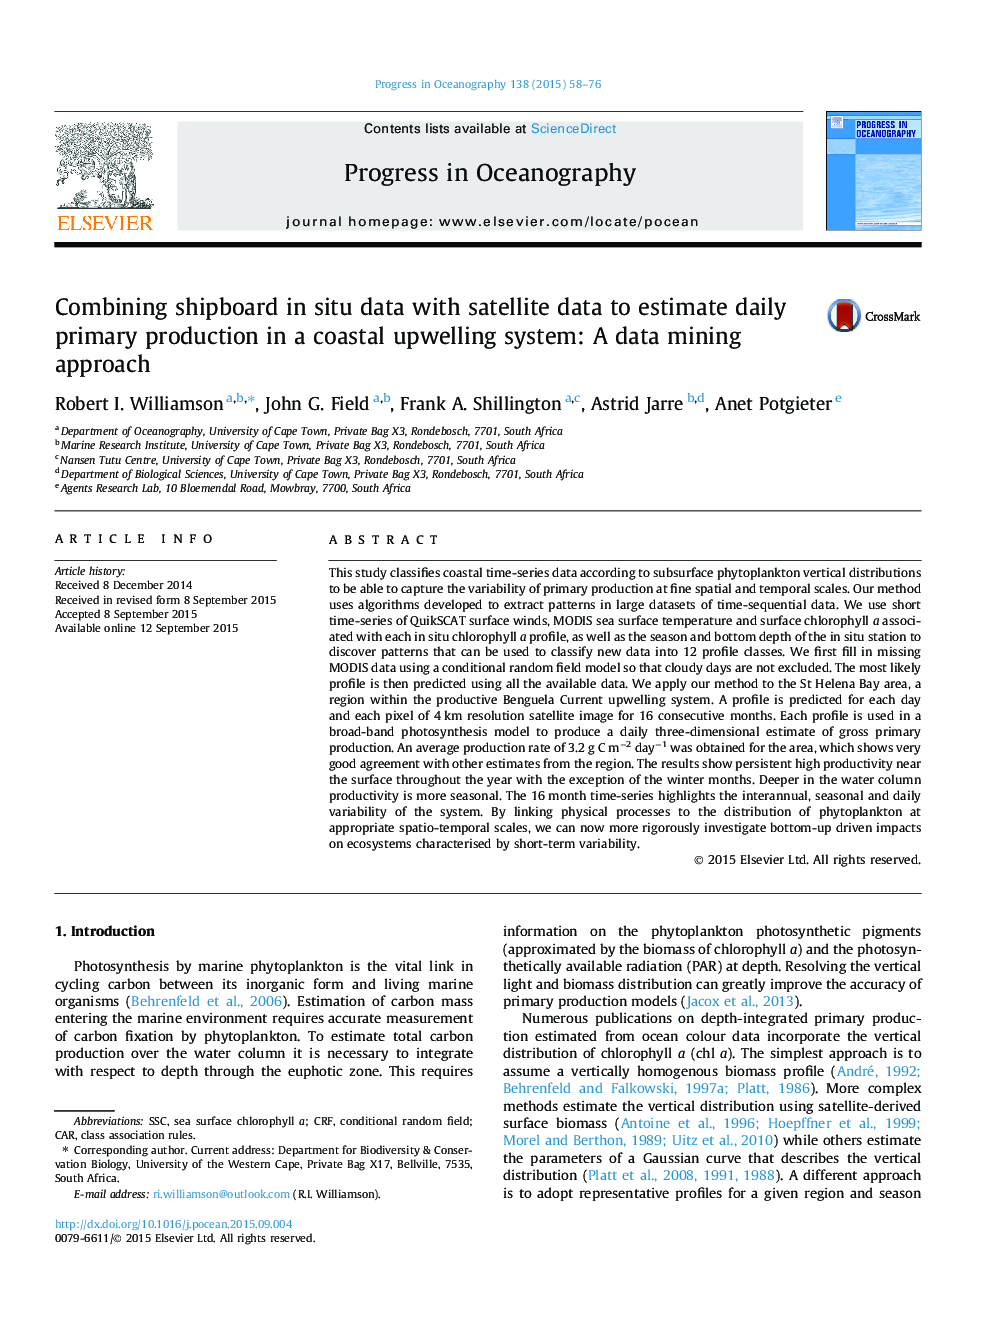 Combining shipboard in situ data with satellite data to estimate daily primary production in a coastal upwelling system: A data mining approach